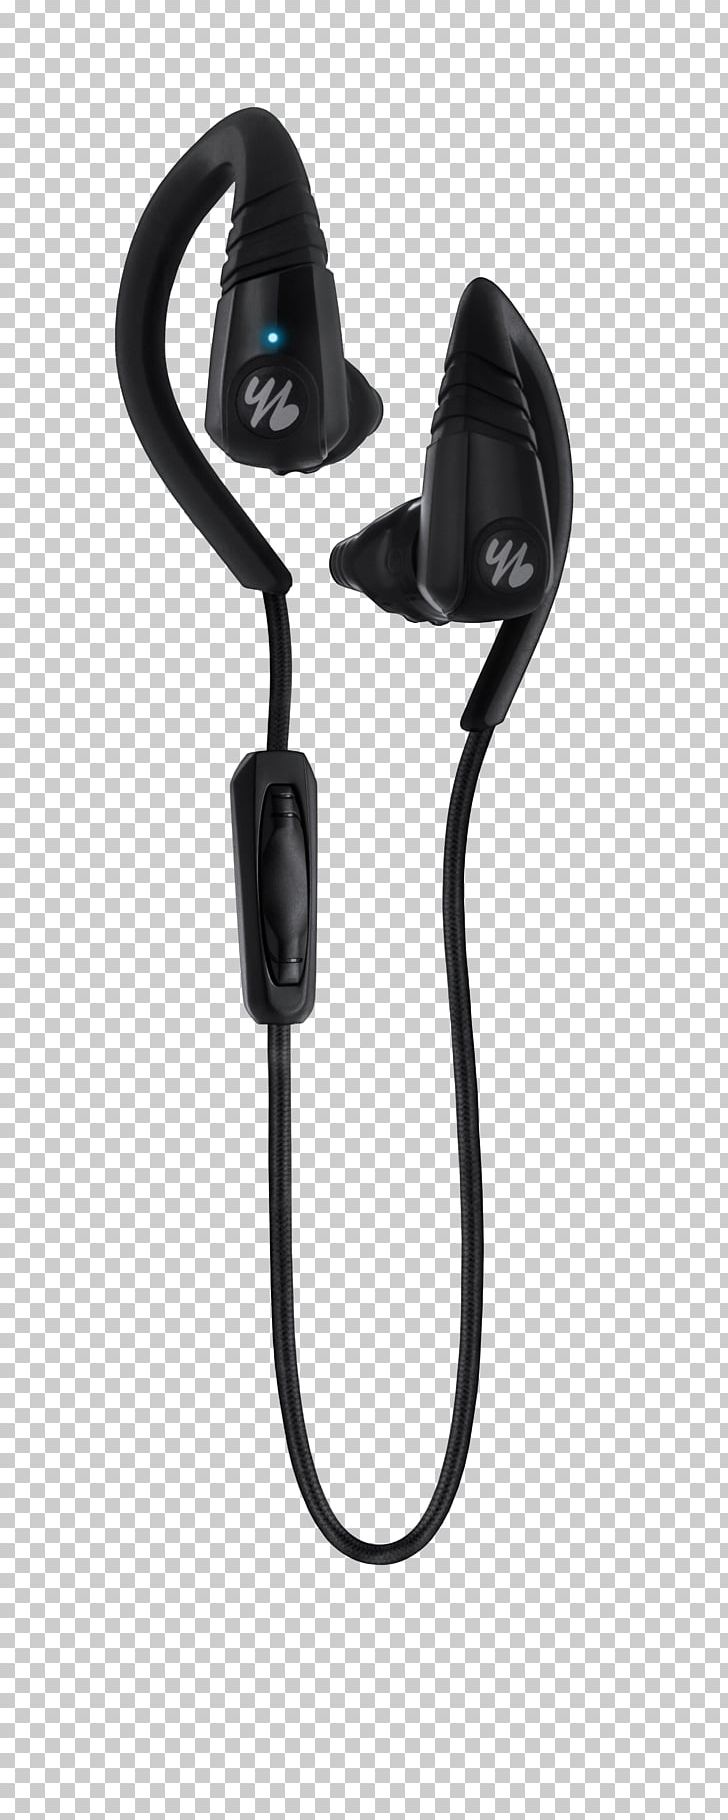 Headphones Microphone Yurbuds Leap Wireless JBL Yurbuds Liberty Bluetooth PNG, Clipart, Audio, Audio Equipment, Bluetooth, Cable, Communication Accessory Free PNG Download